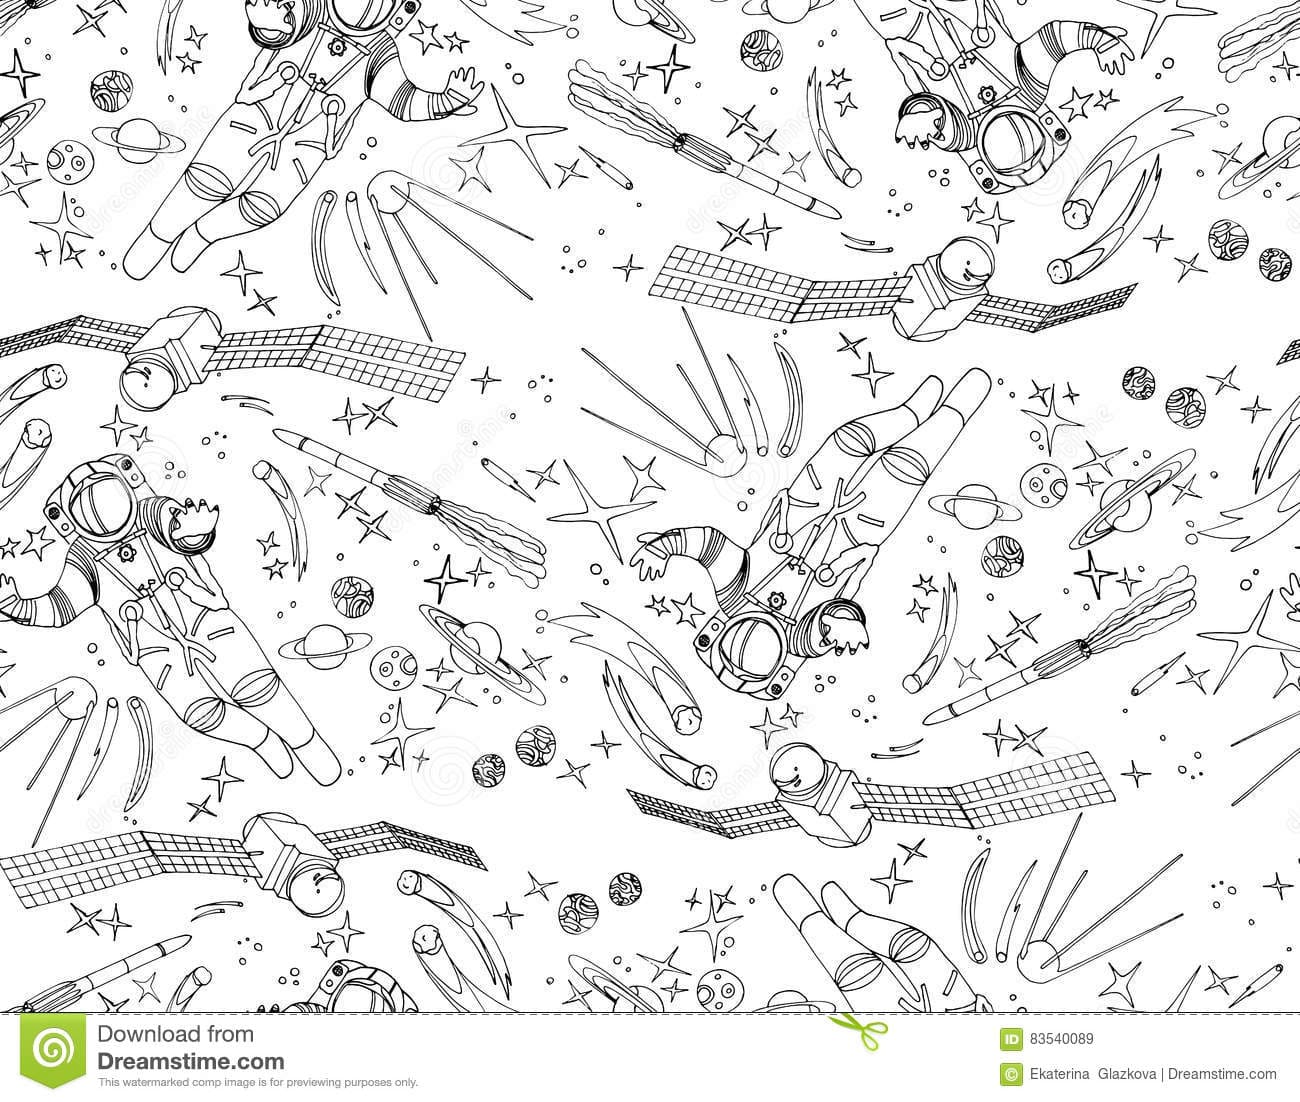 Astronaut and satellites pattern Coloring Page